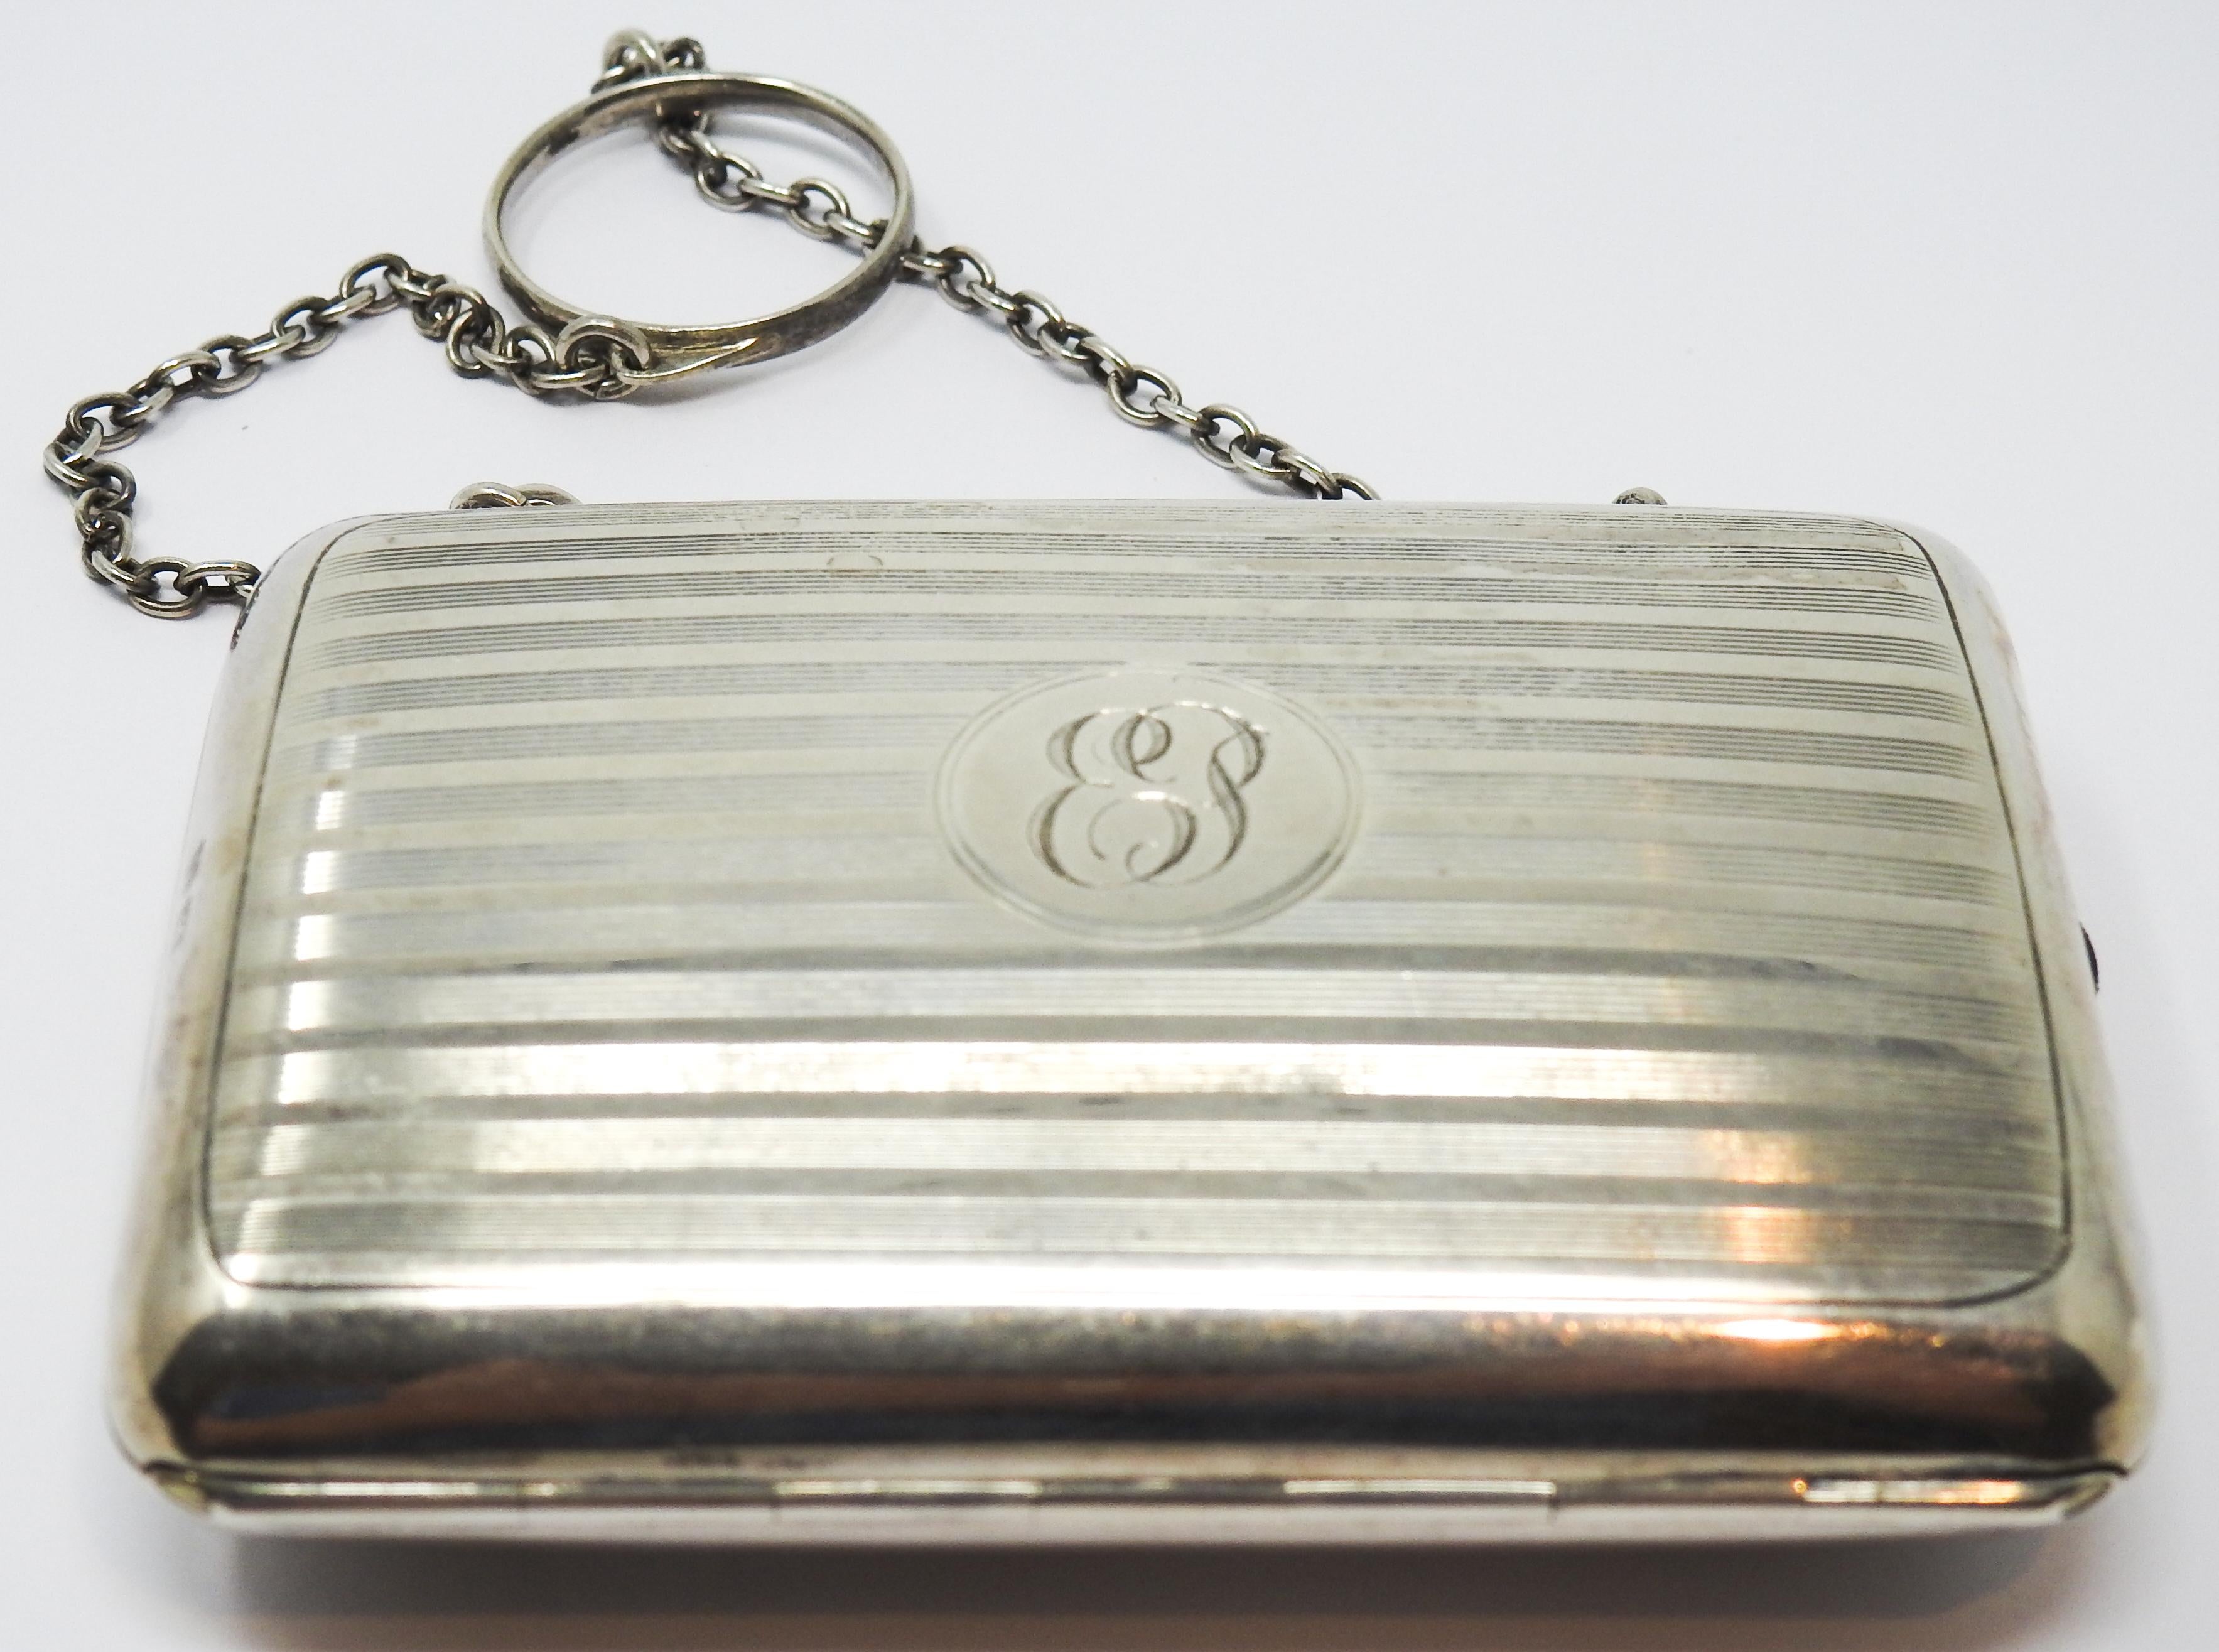 Offering this gorgeous little Art Nouveau sterling silver change purse. The front has an EP engraved in a center circle. There is a latch and button release mechanism. When opened it reveals three slots done in a dark green watermarked silk. The